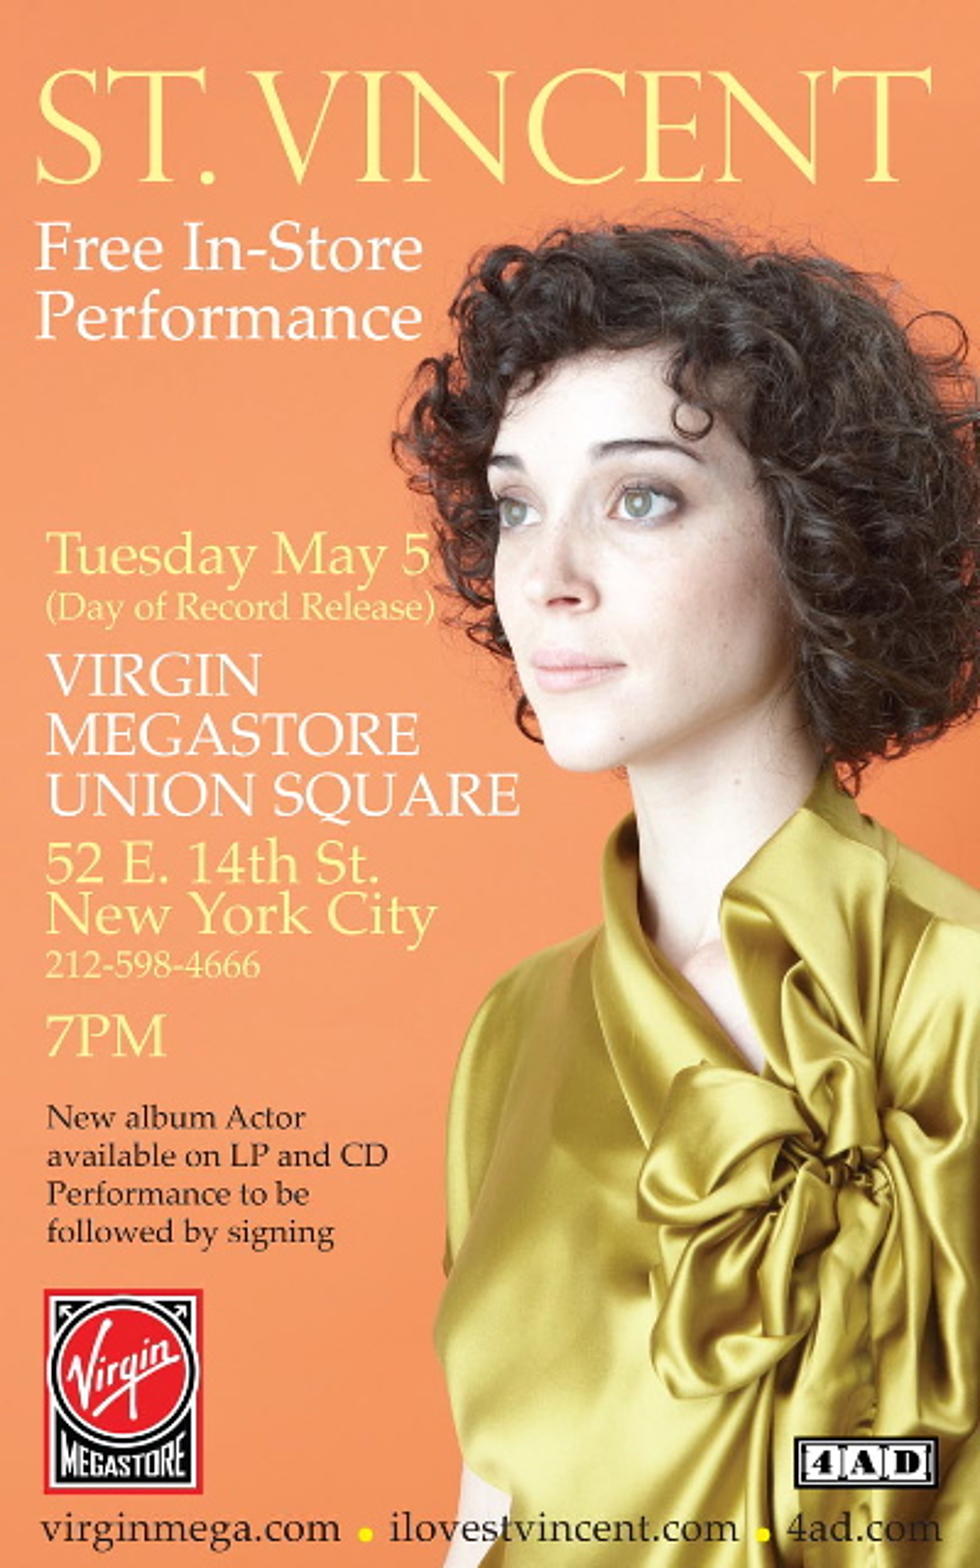 St Vincent playing one of the last NYC Virgin mega-in-stores